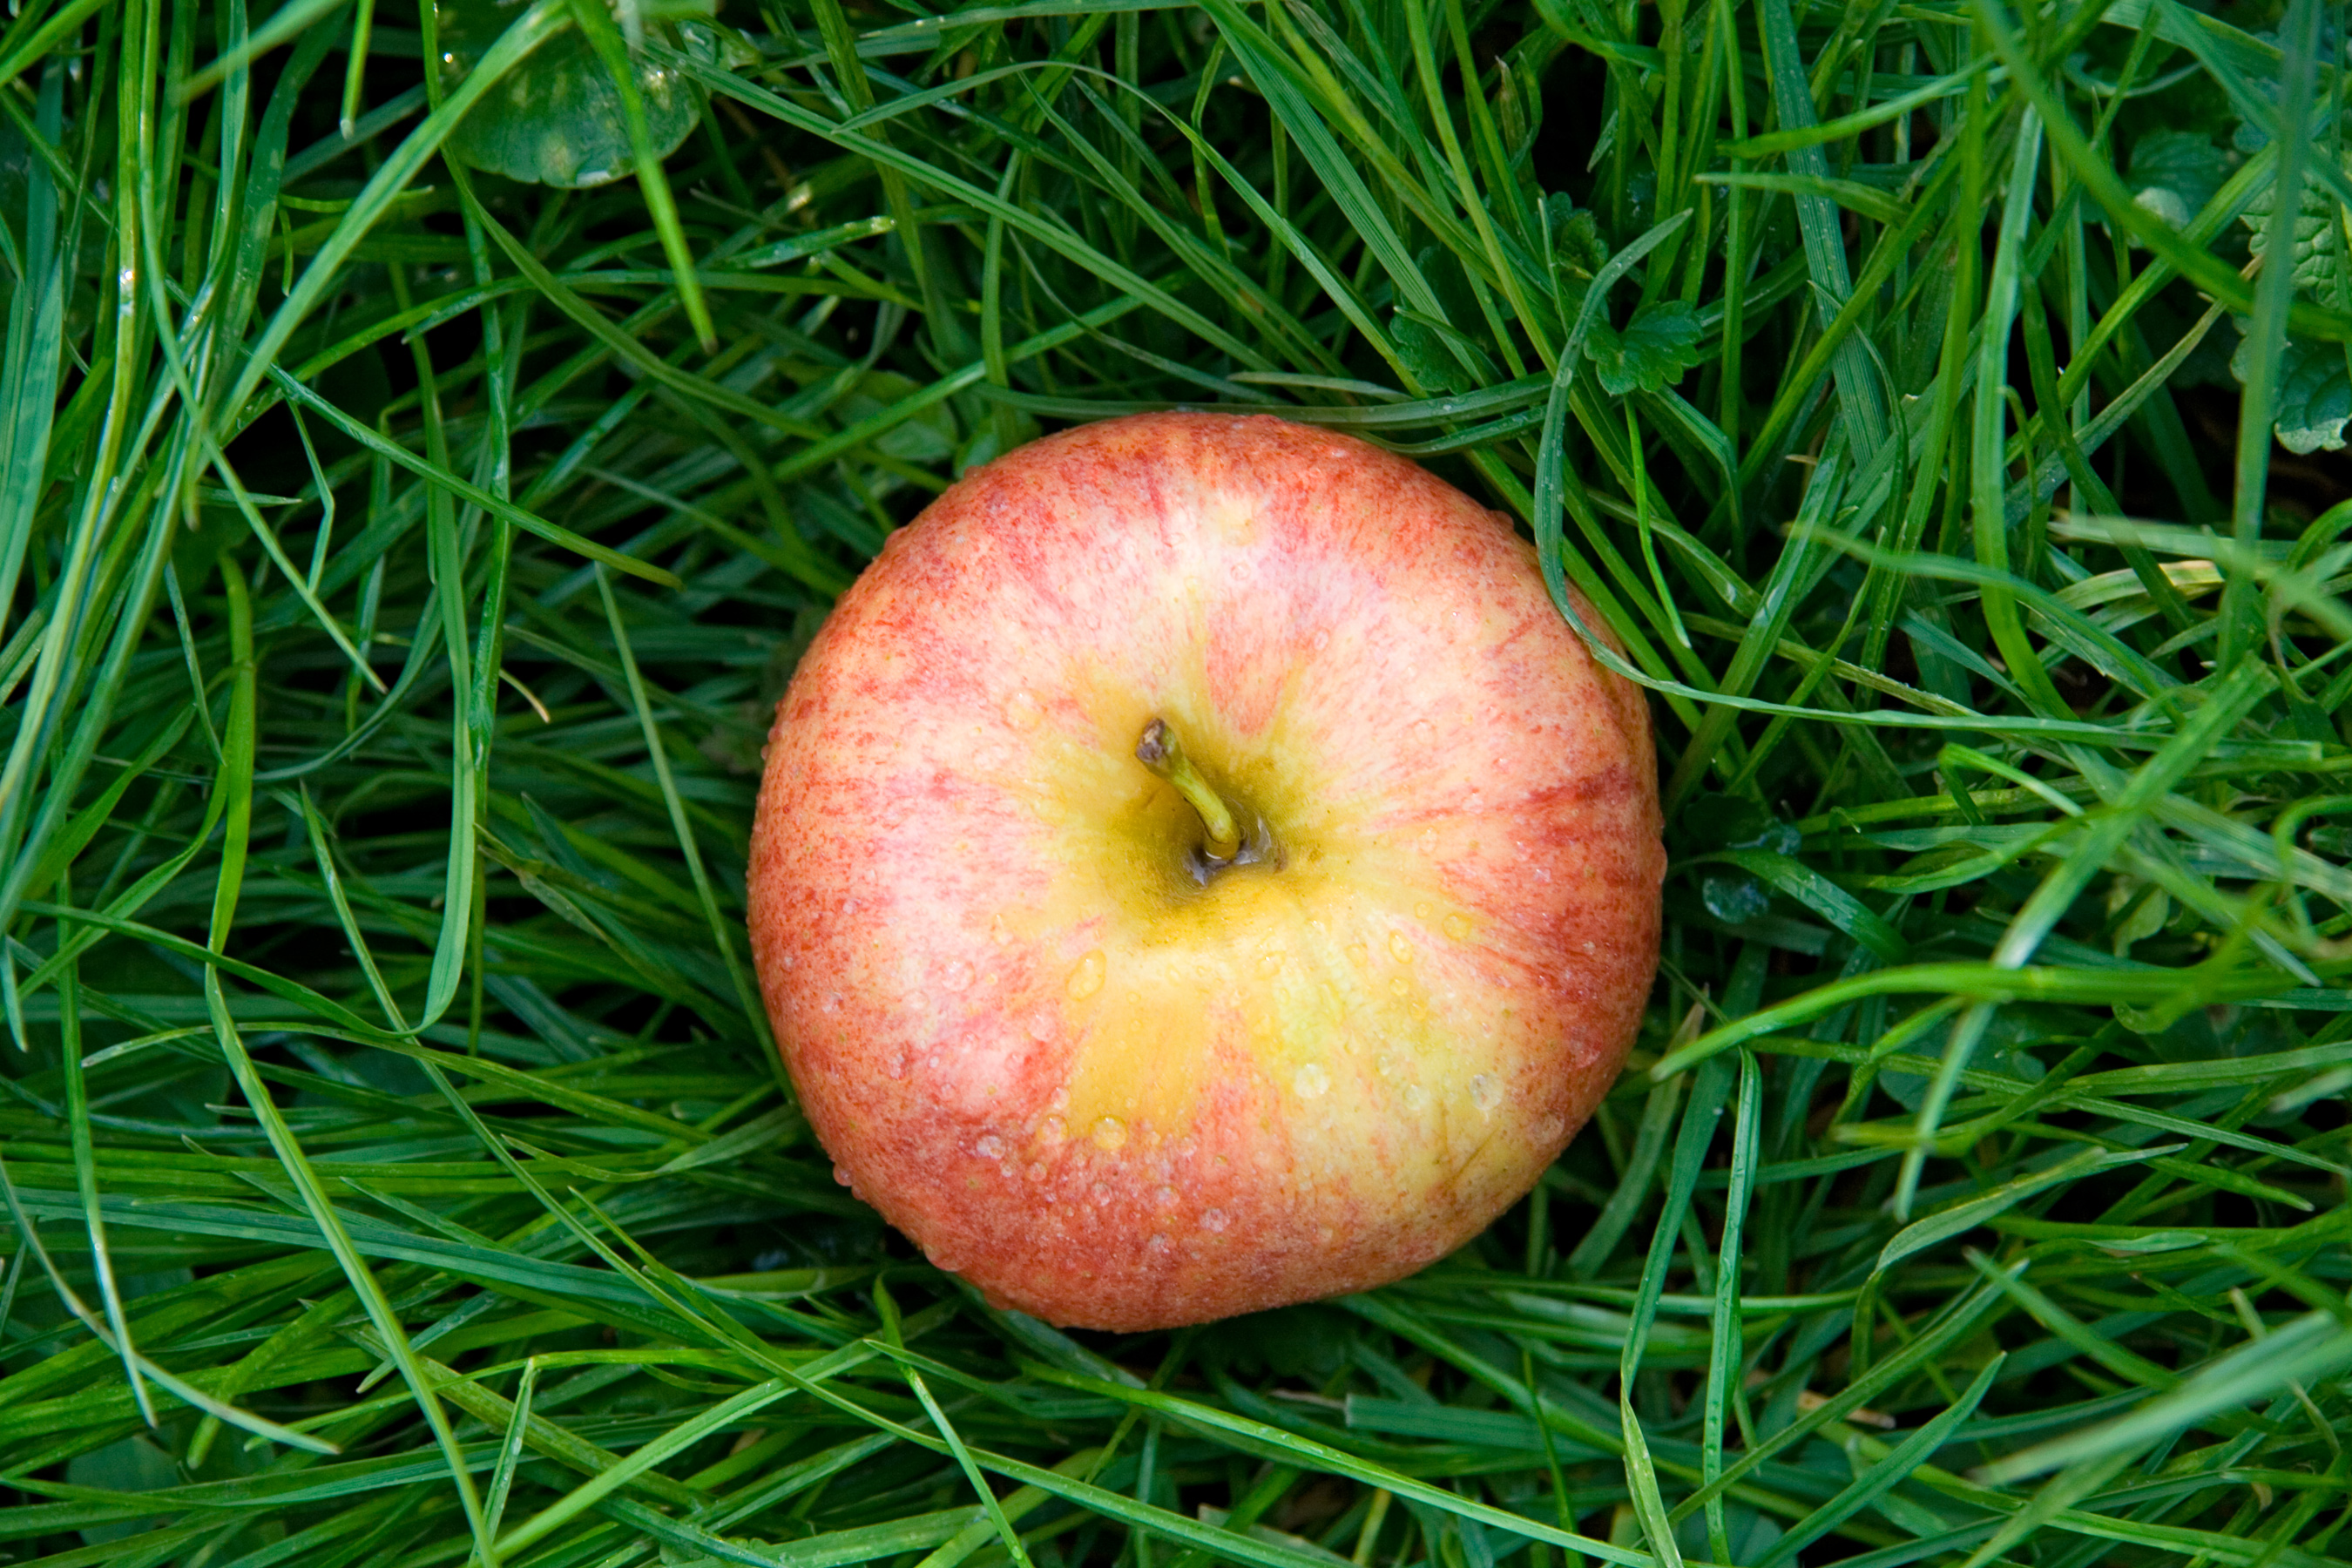 Apple in the grass